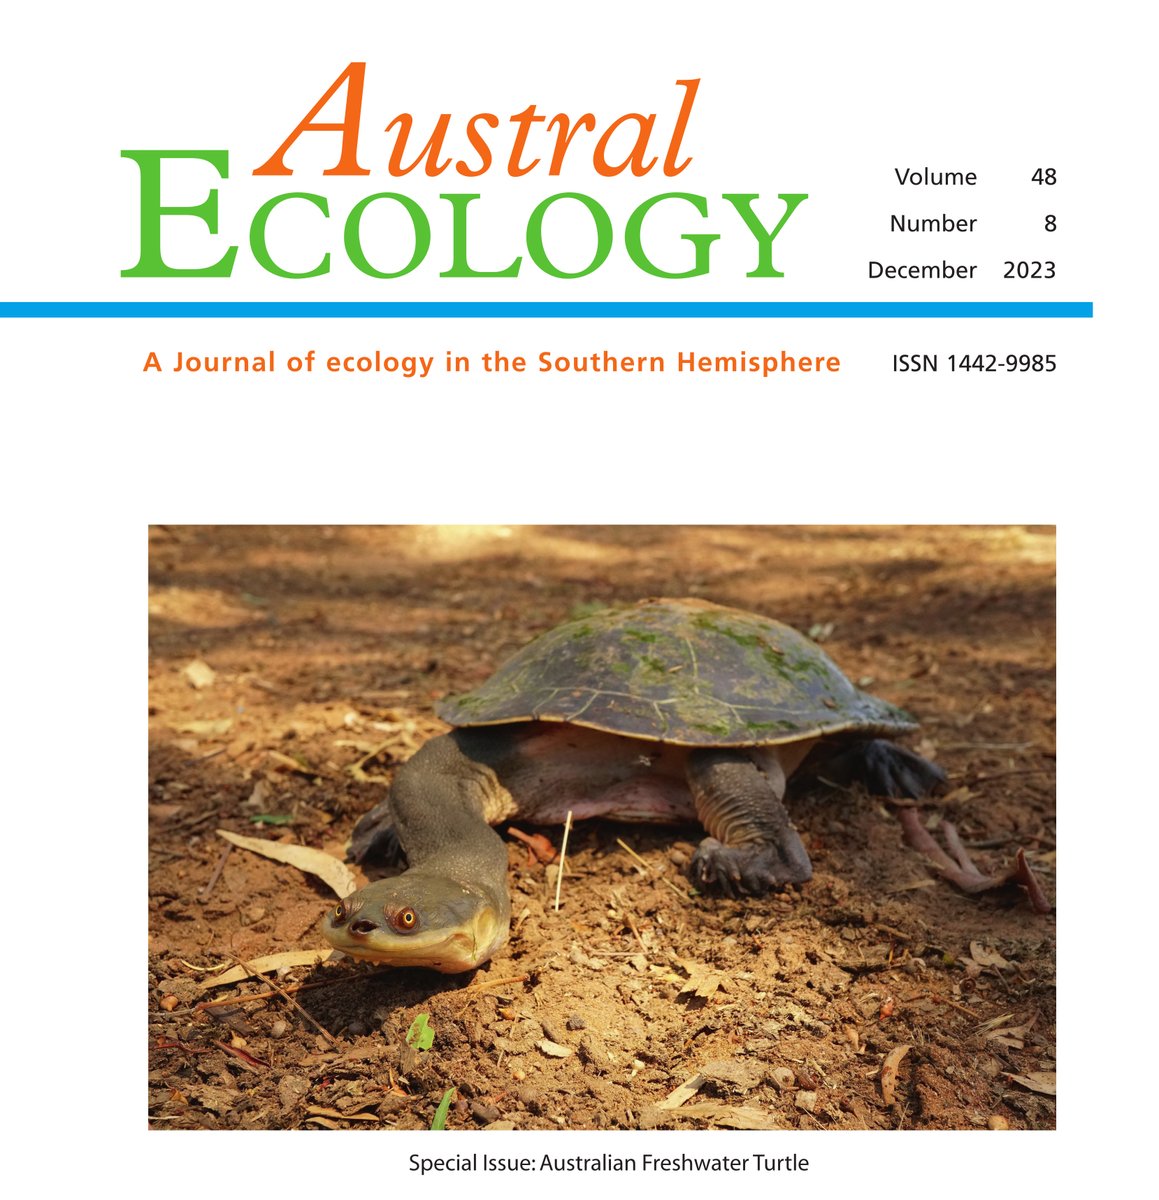 One of my broad-shelled #turtle photos made the cover of our special issue in @AustralEcology. Check it out for lots of great work on Australia's incredible freshwater #turtles. #WildOz #WildlifePhotography onlinelibrary.wiley.com/toc/14429993/2…